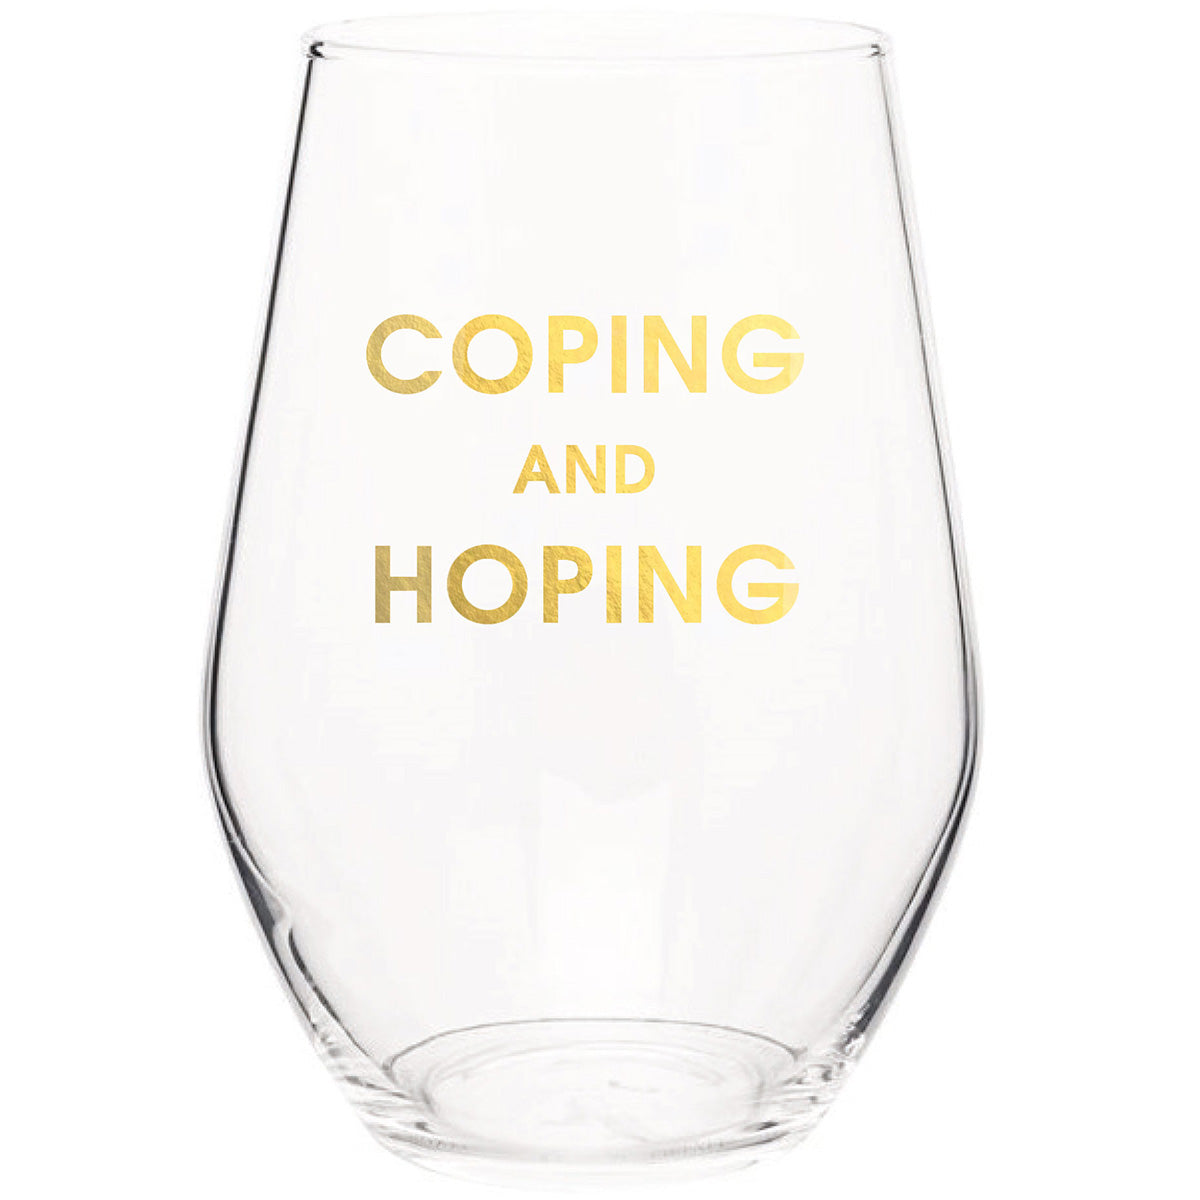 Coping and Hoping - Gold Foil Stemless Wine Glass